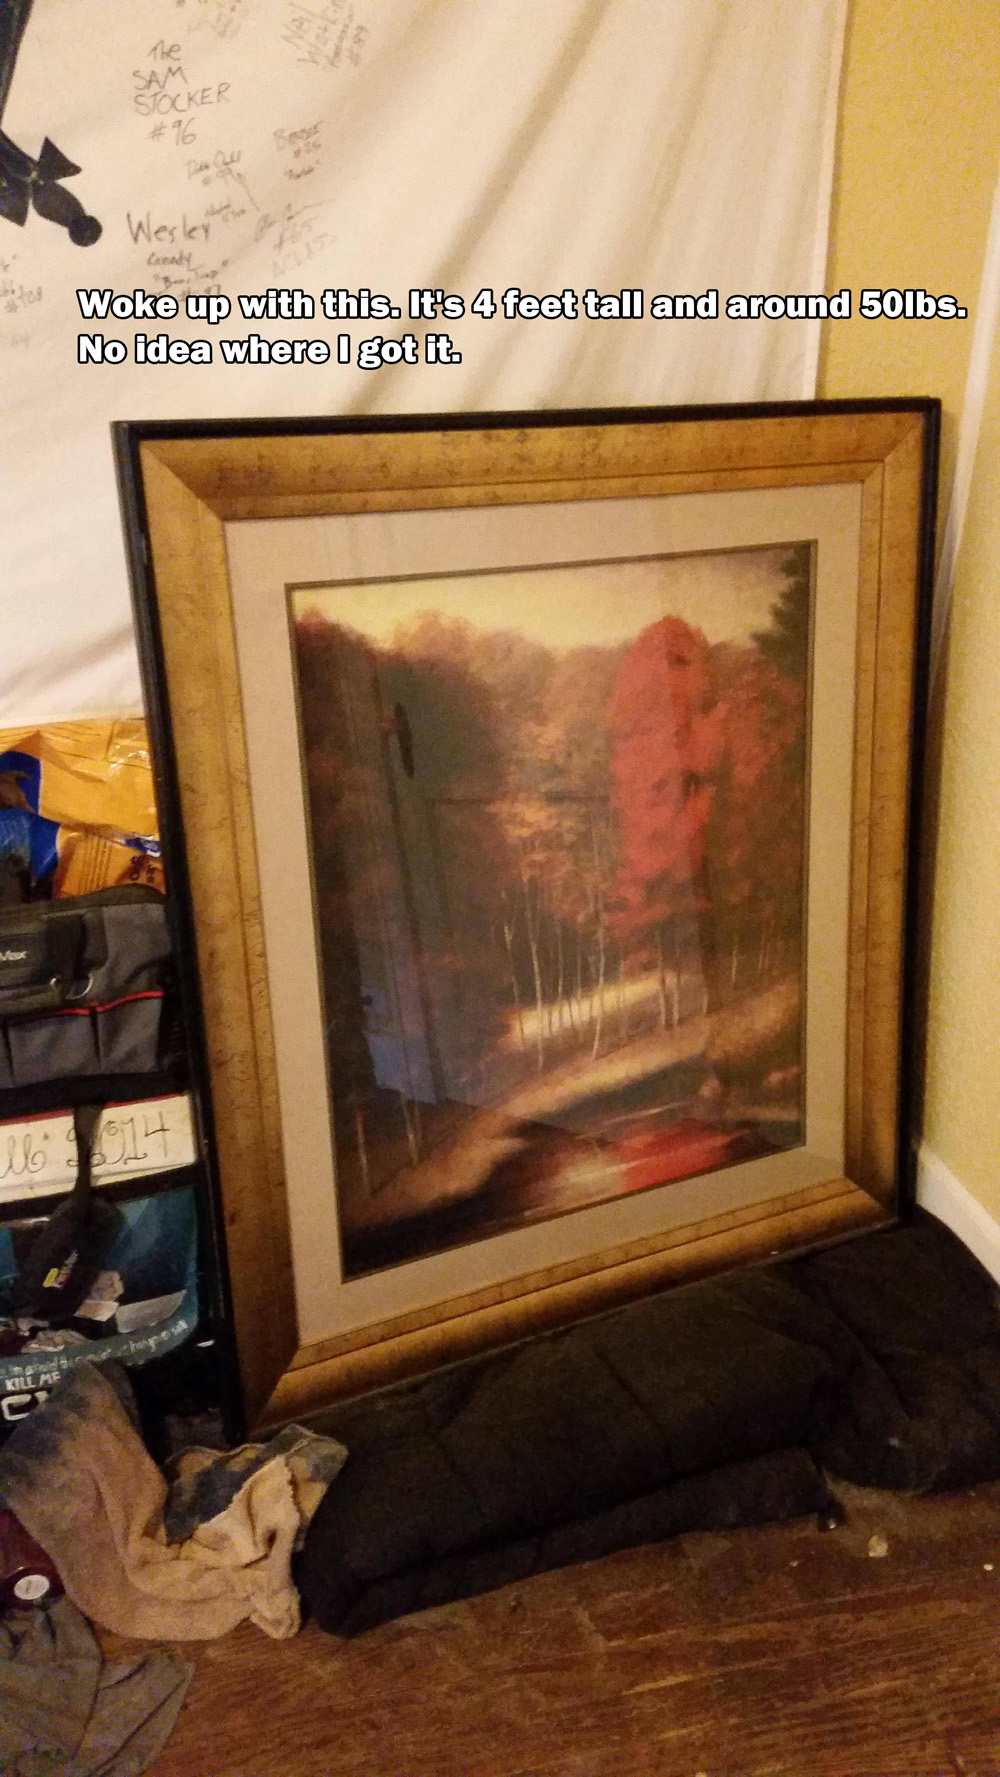 picture frame - Woke up with this. It'34 feet tall and around 50lbs. No idea where I got it